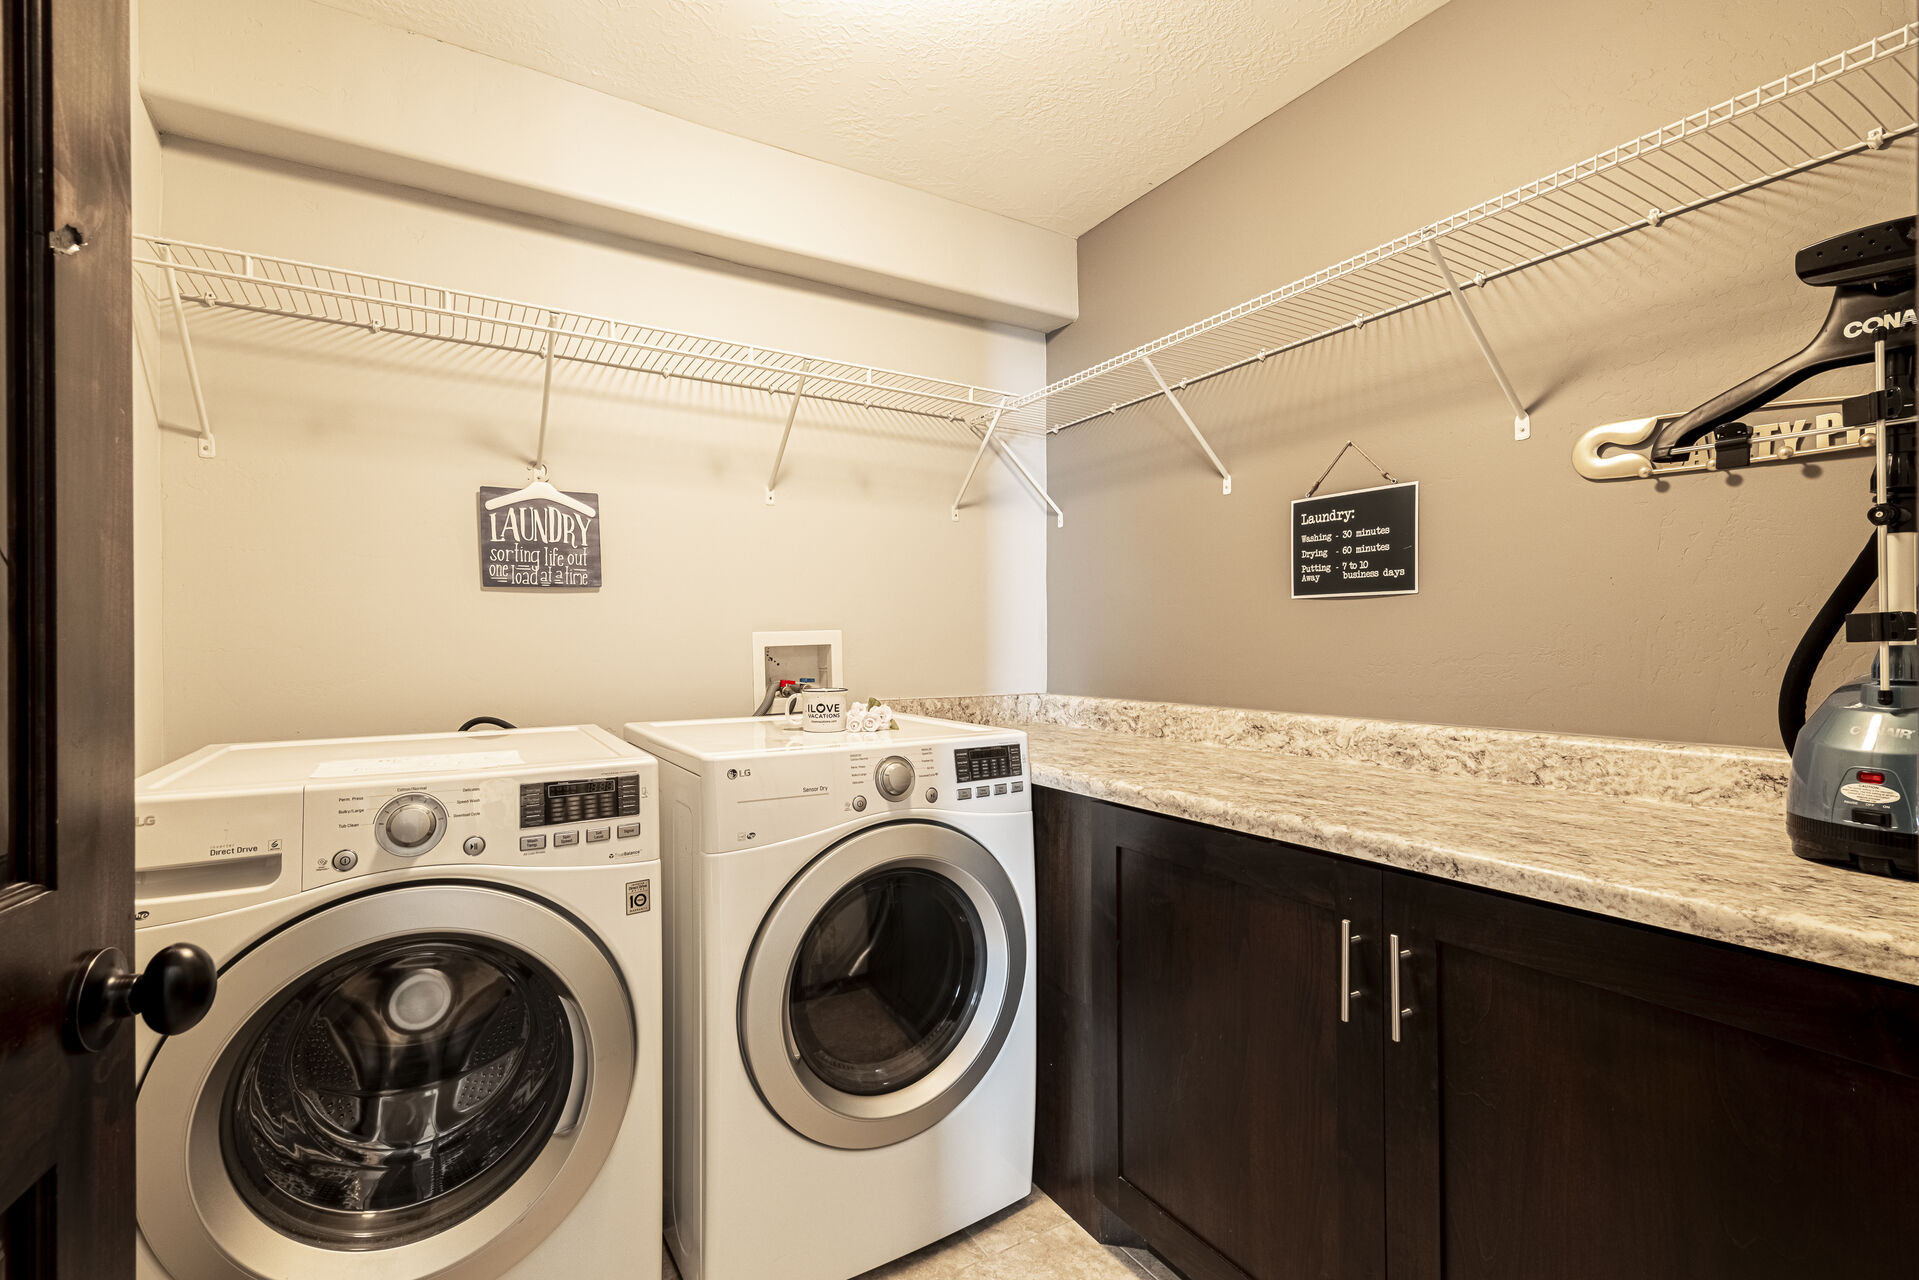 3rd leve laundry room